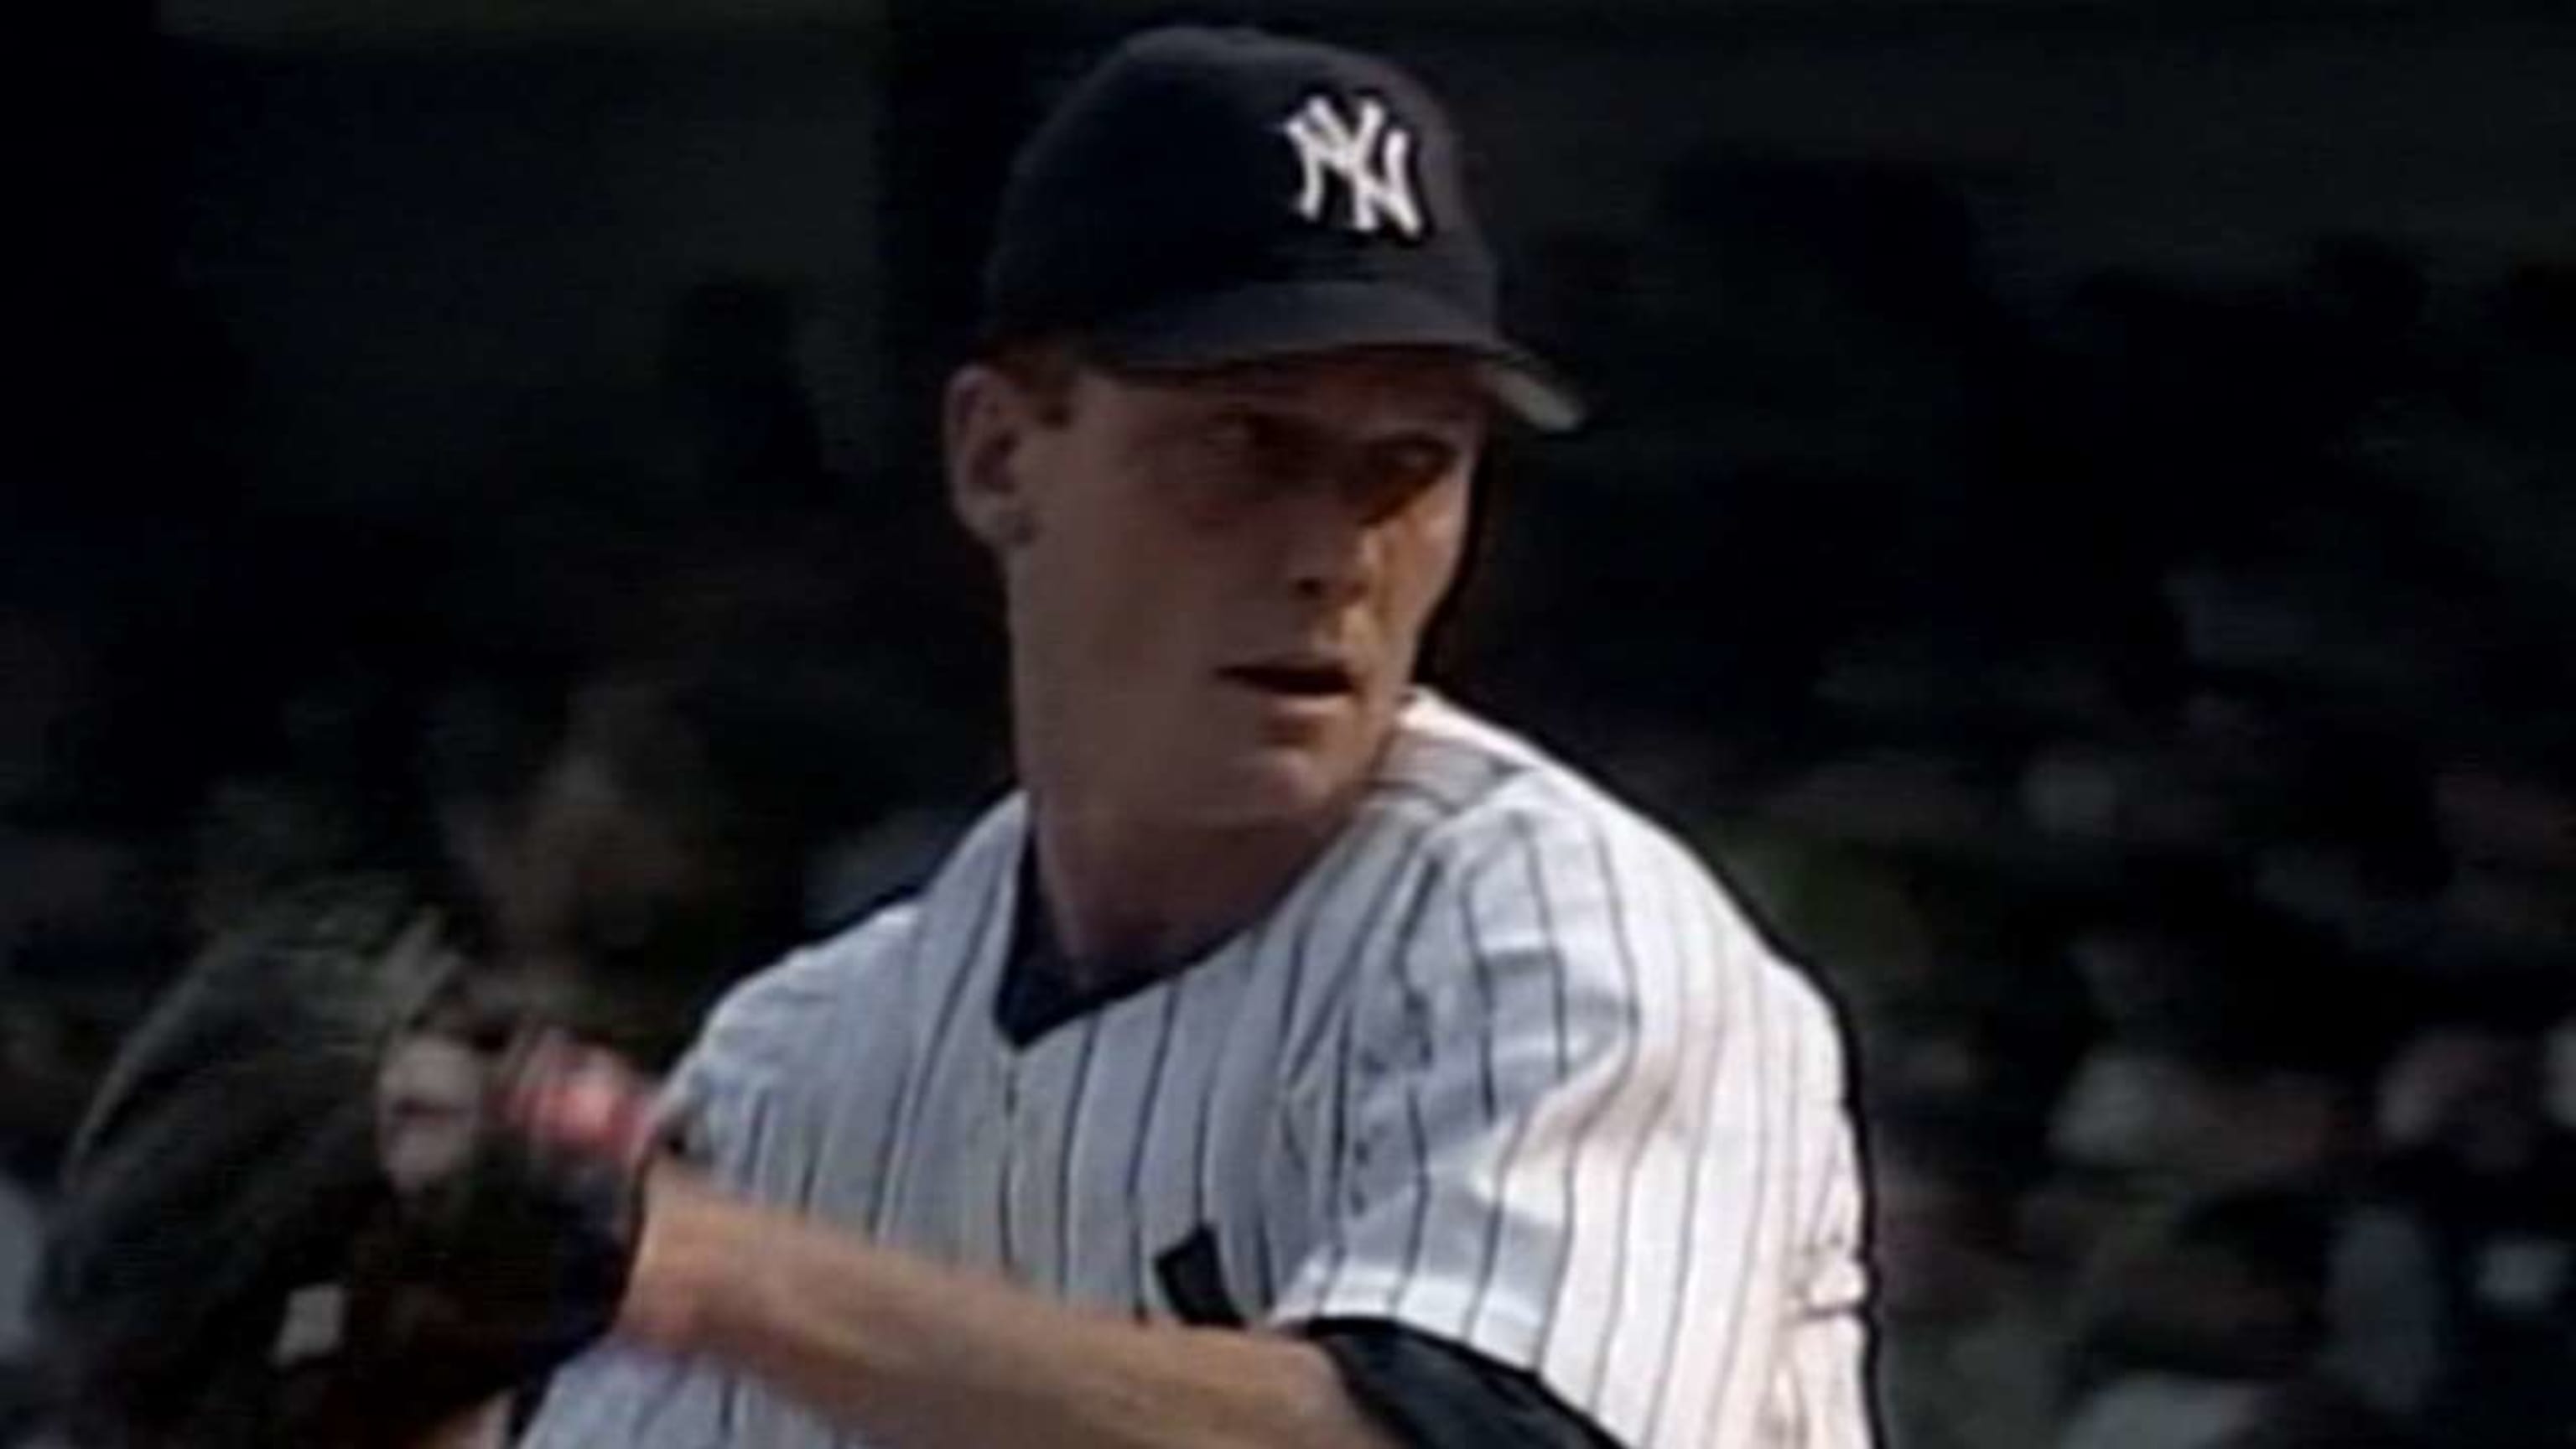 Examining Hall of Fame case for New York Yankees, Mets legend David Cone